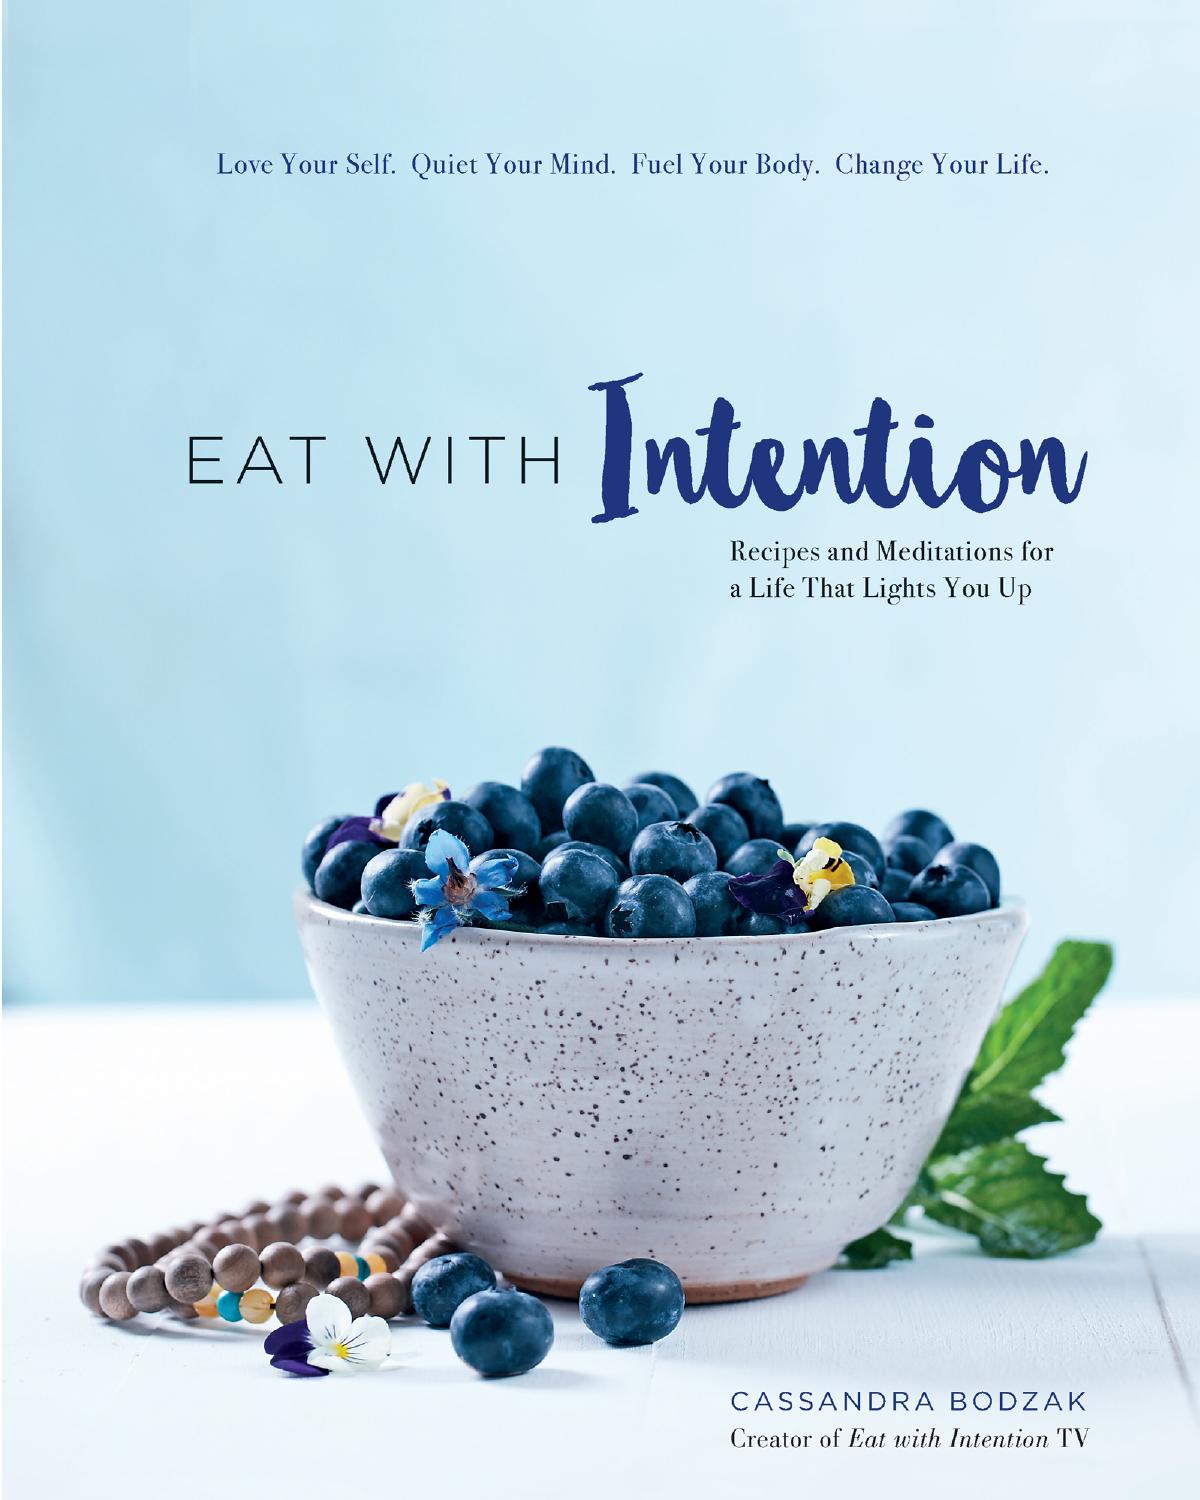 Eat With Intention by Cassandra Bodzak